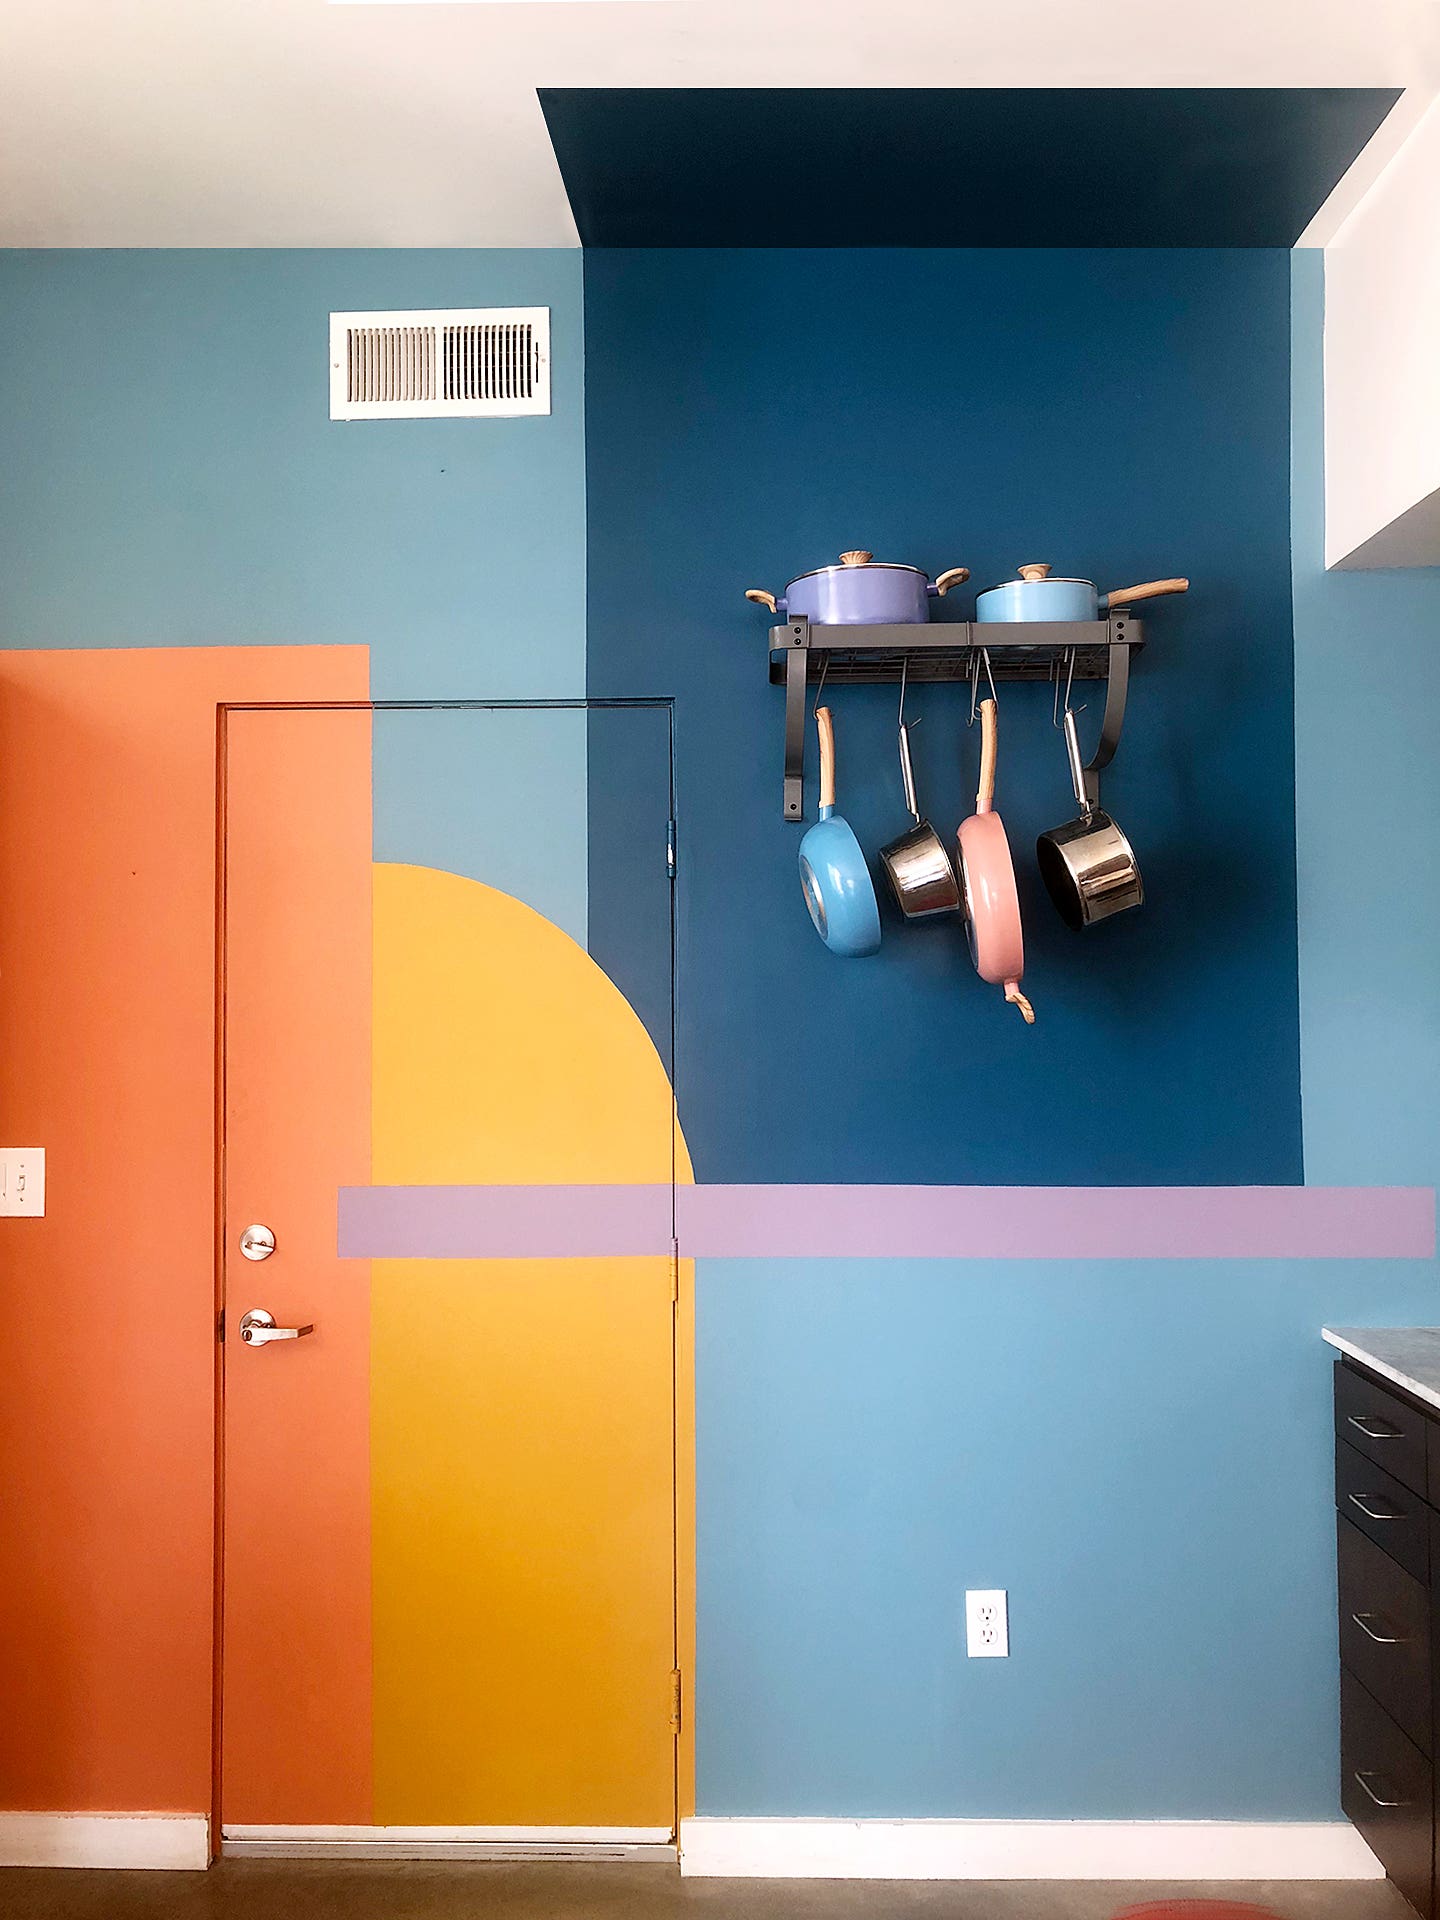 You Don’t Need to Be an Artist to DIY This Color-Blocked Mural